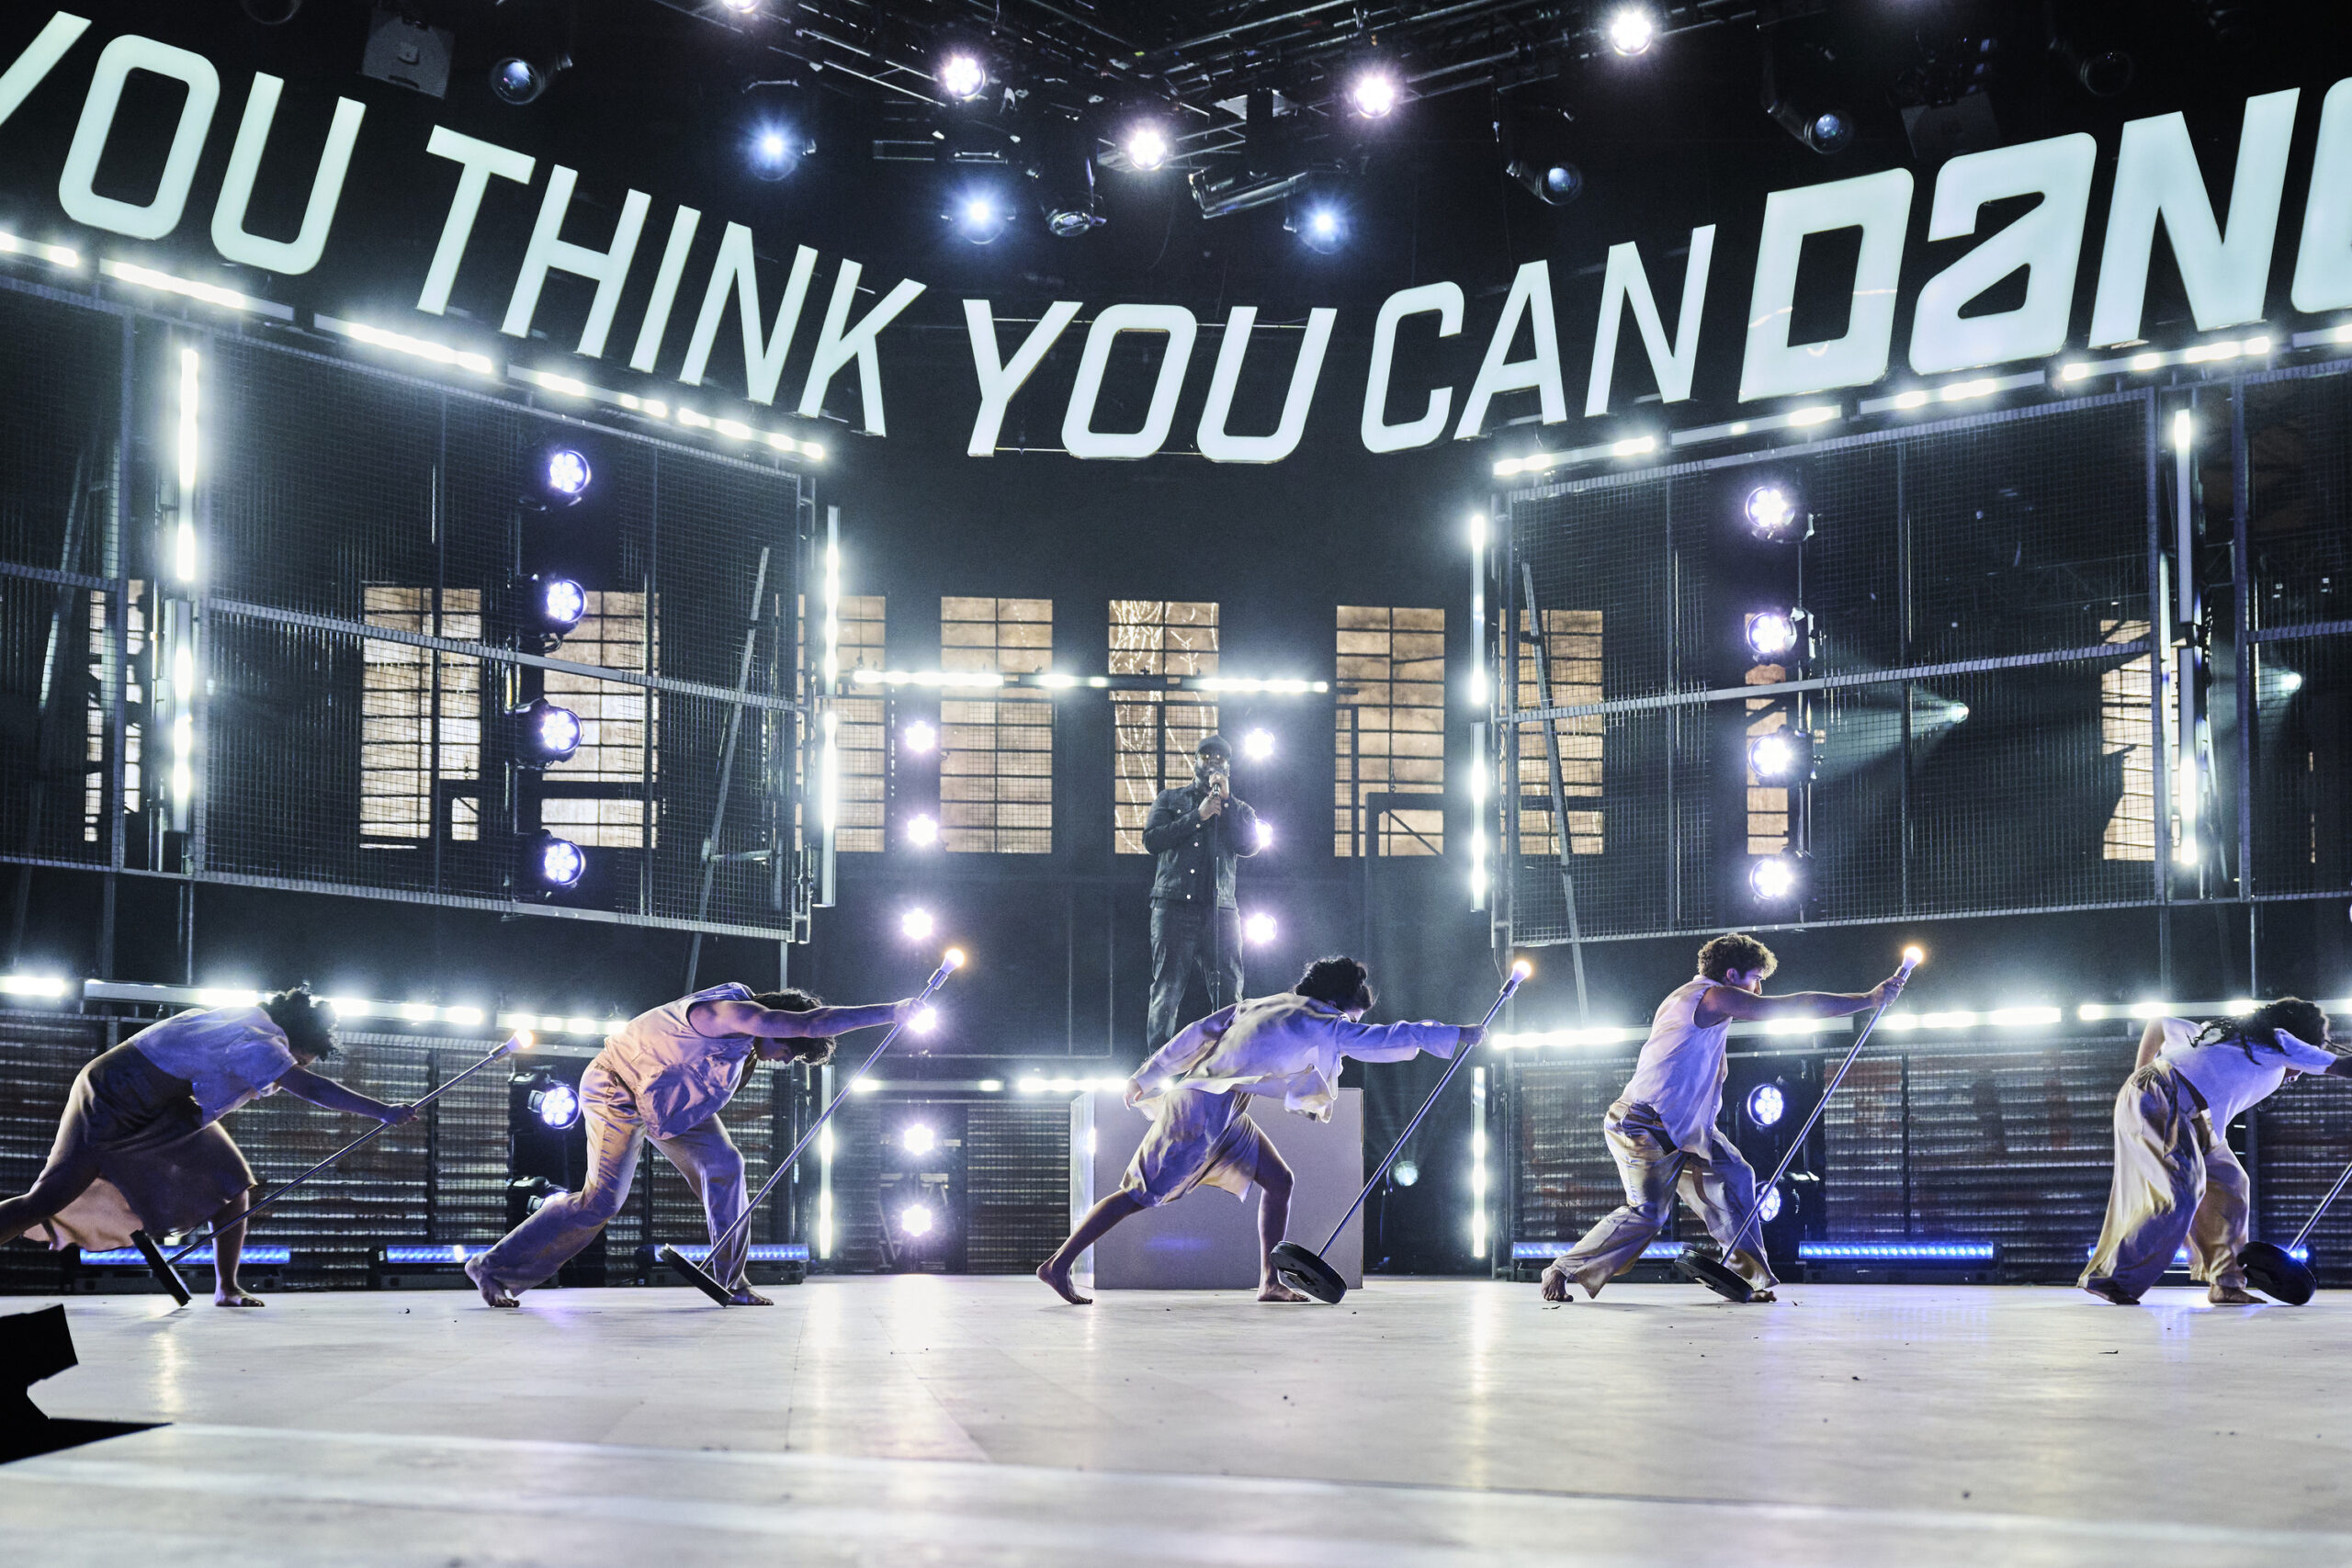 Dancers on Season 18 of “So You Think You Can Dance” take on the challenge of dancing on tour.